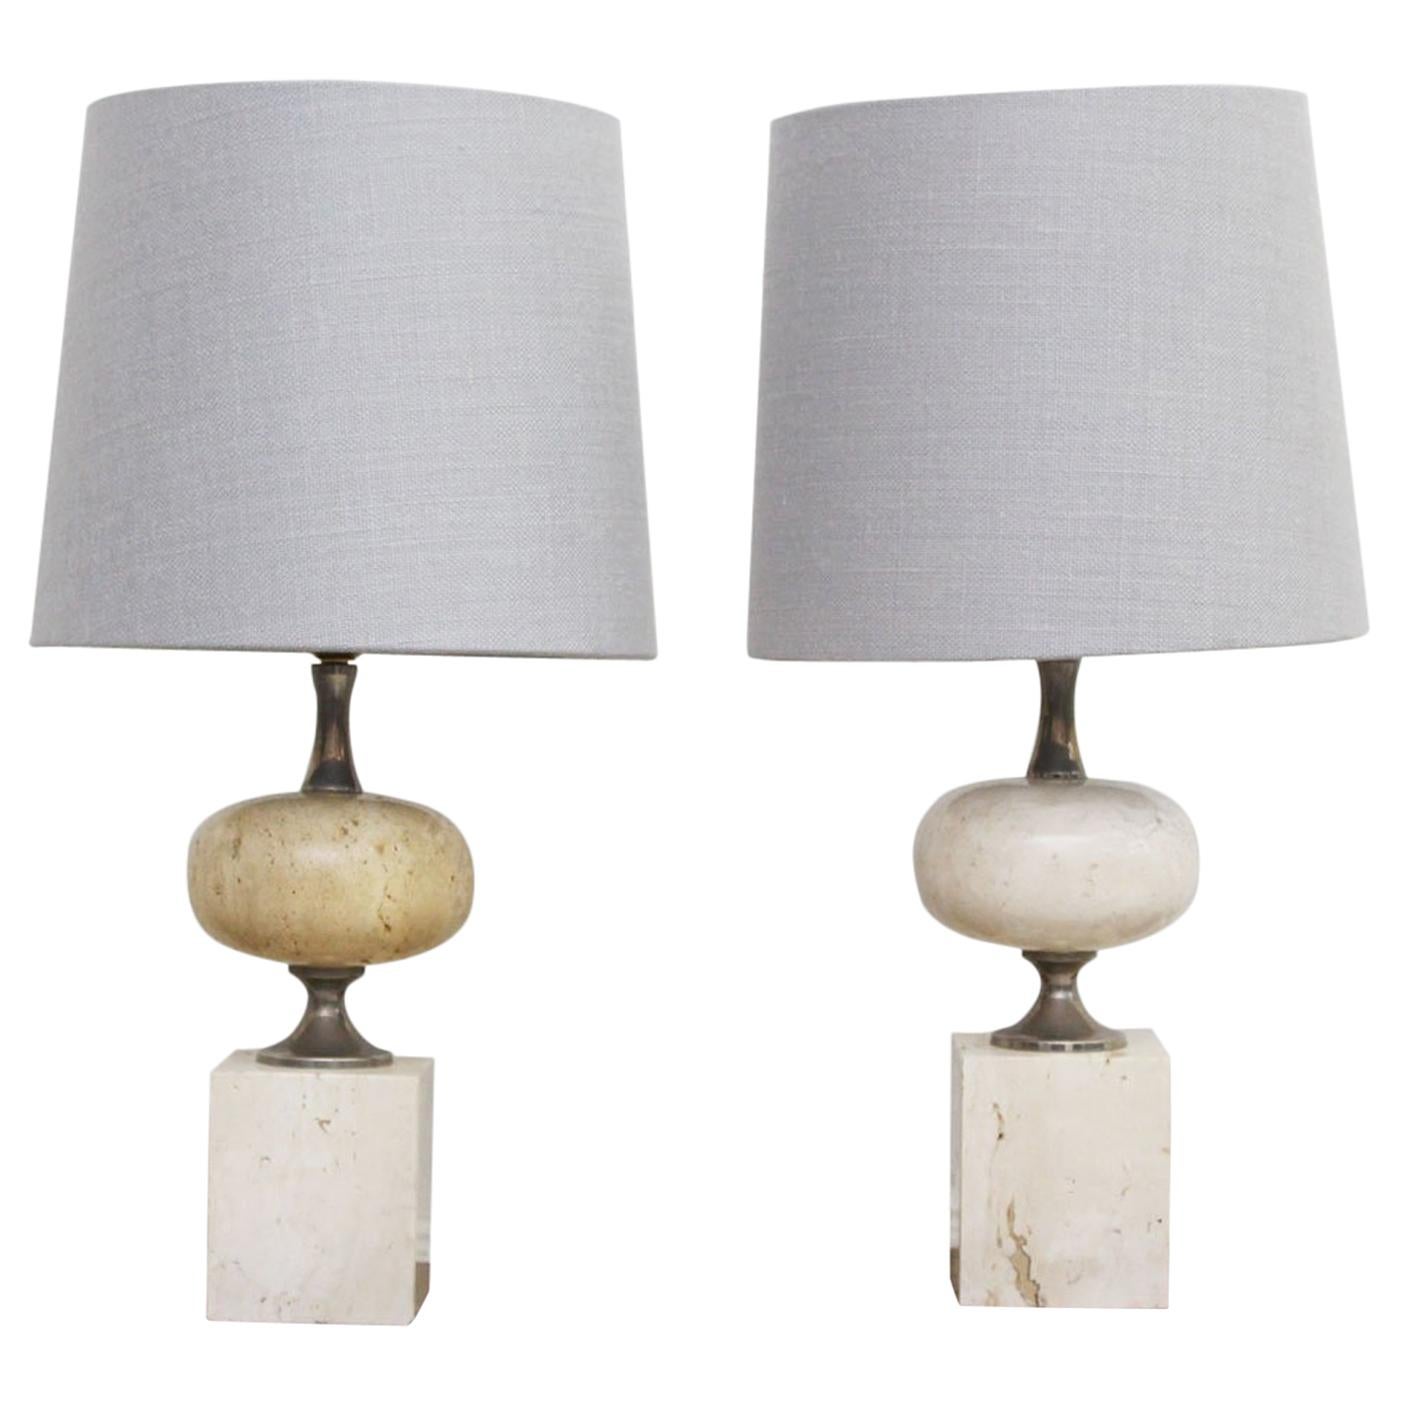 Pair of 1970s Chrome and Travertine Table Lights by Philippe Barbier